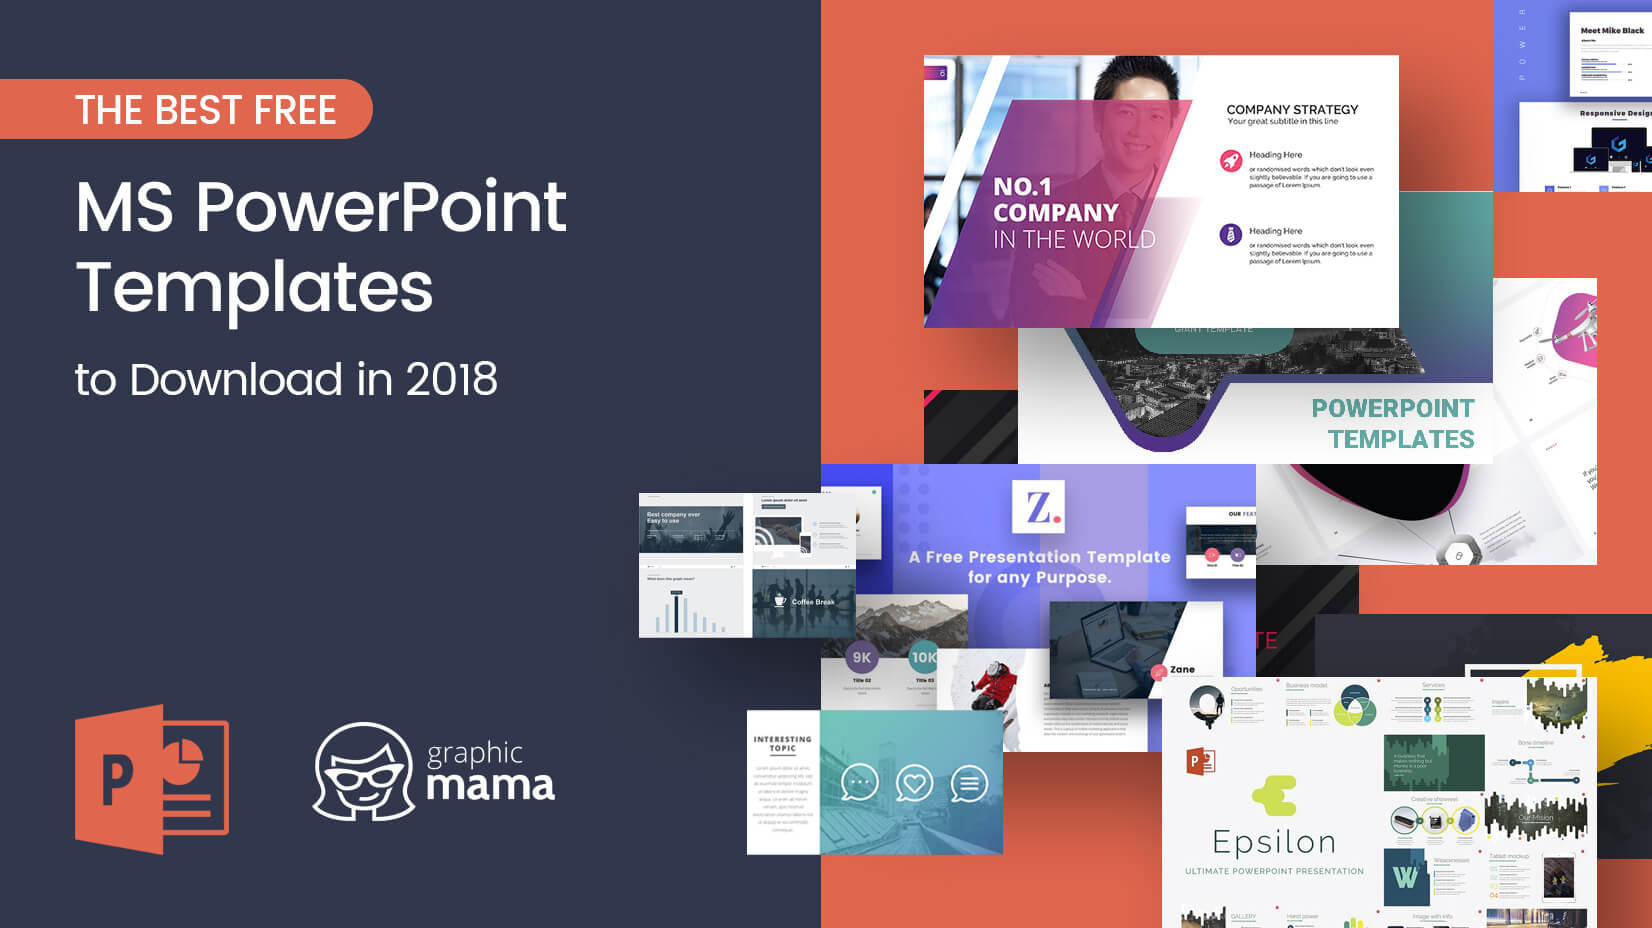 The Best Free Powerpoint Templates To Download In 2018 Throughout How To Design A Powerpoint Template